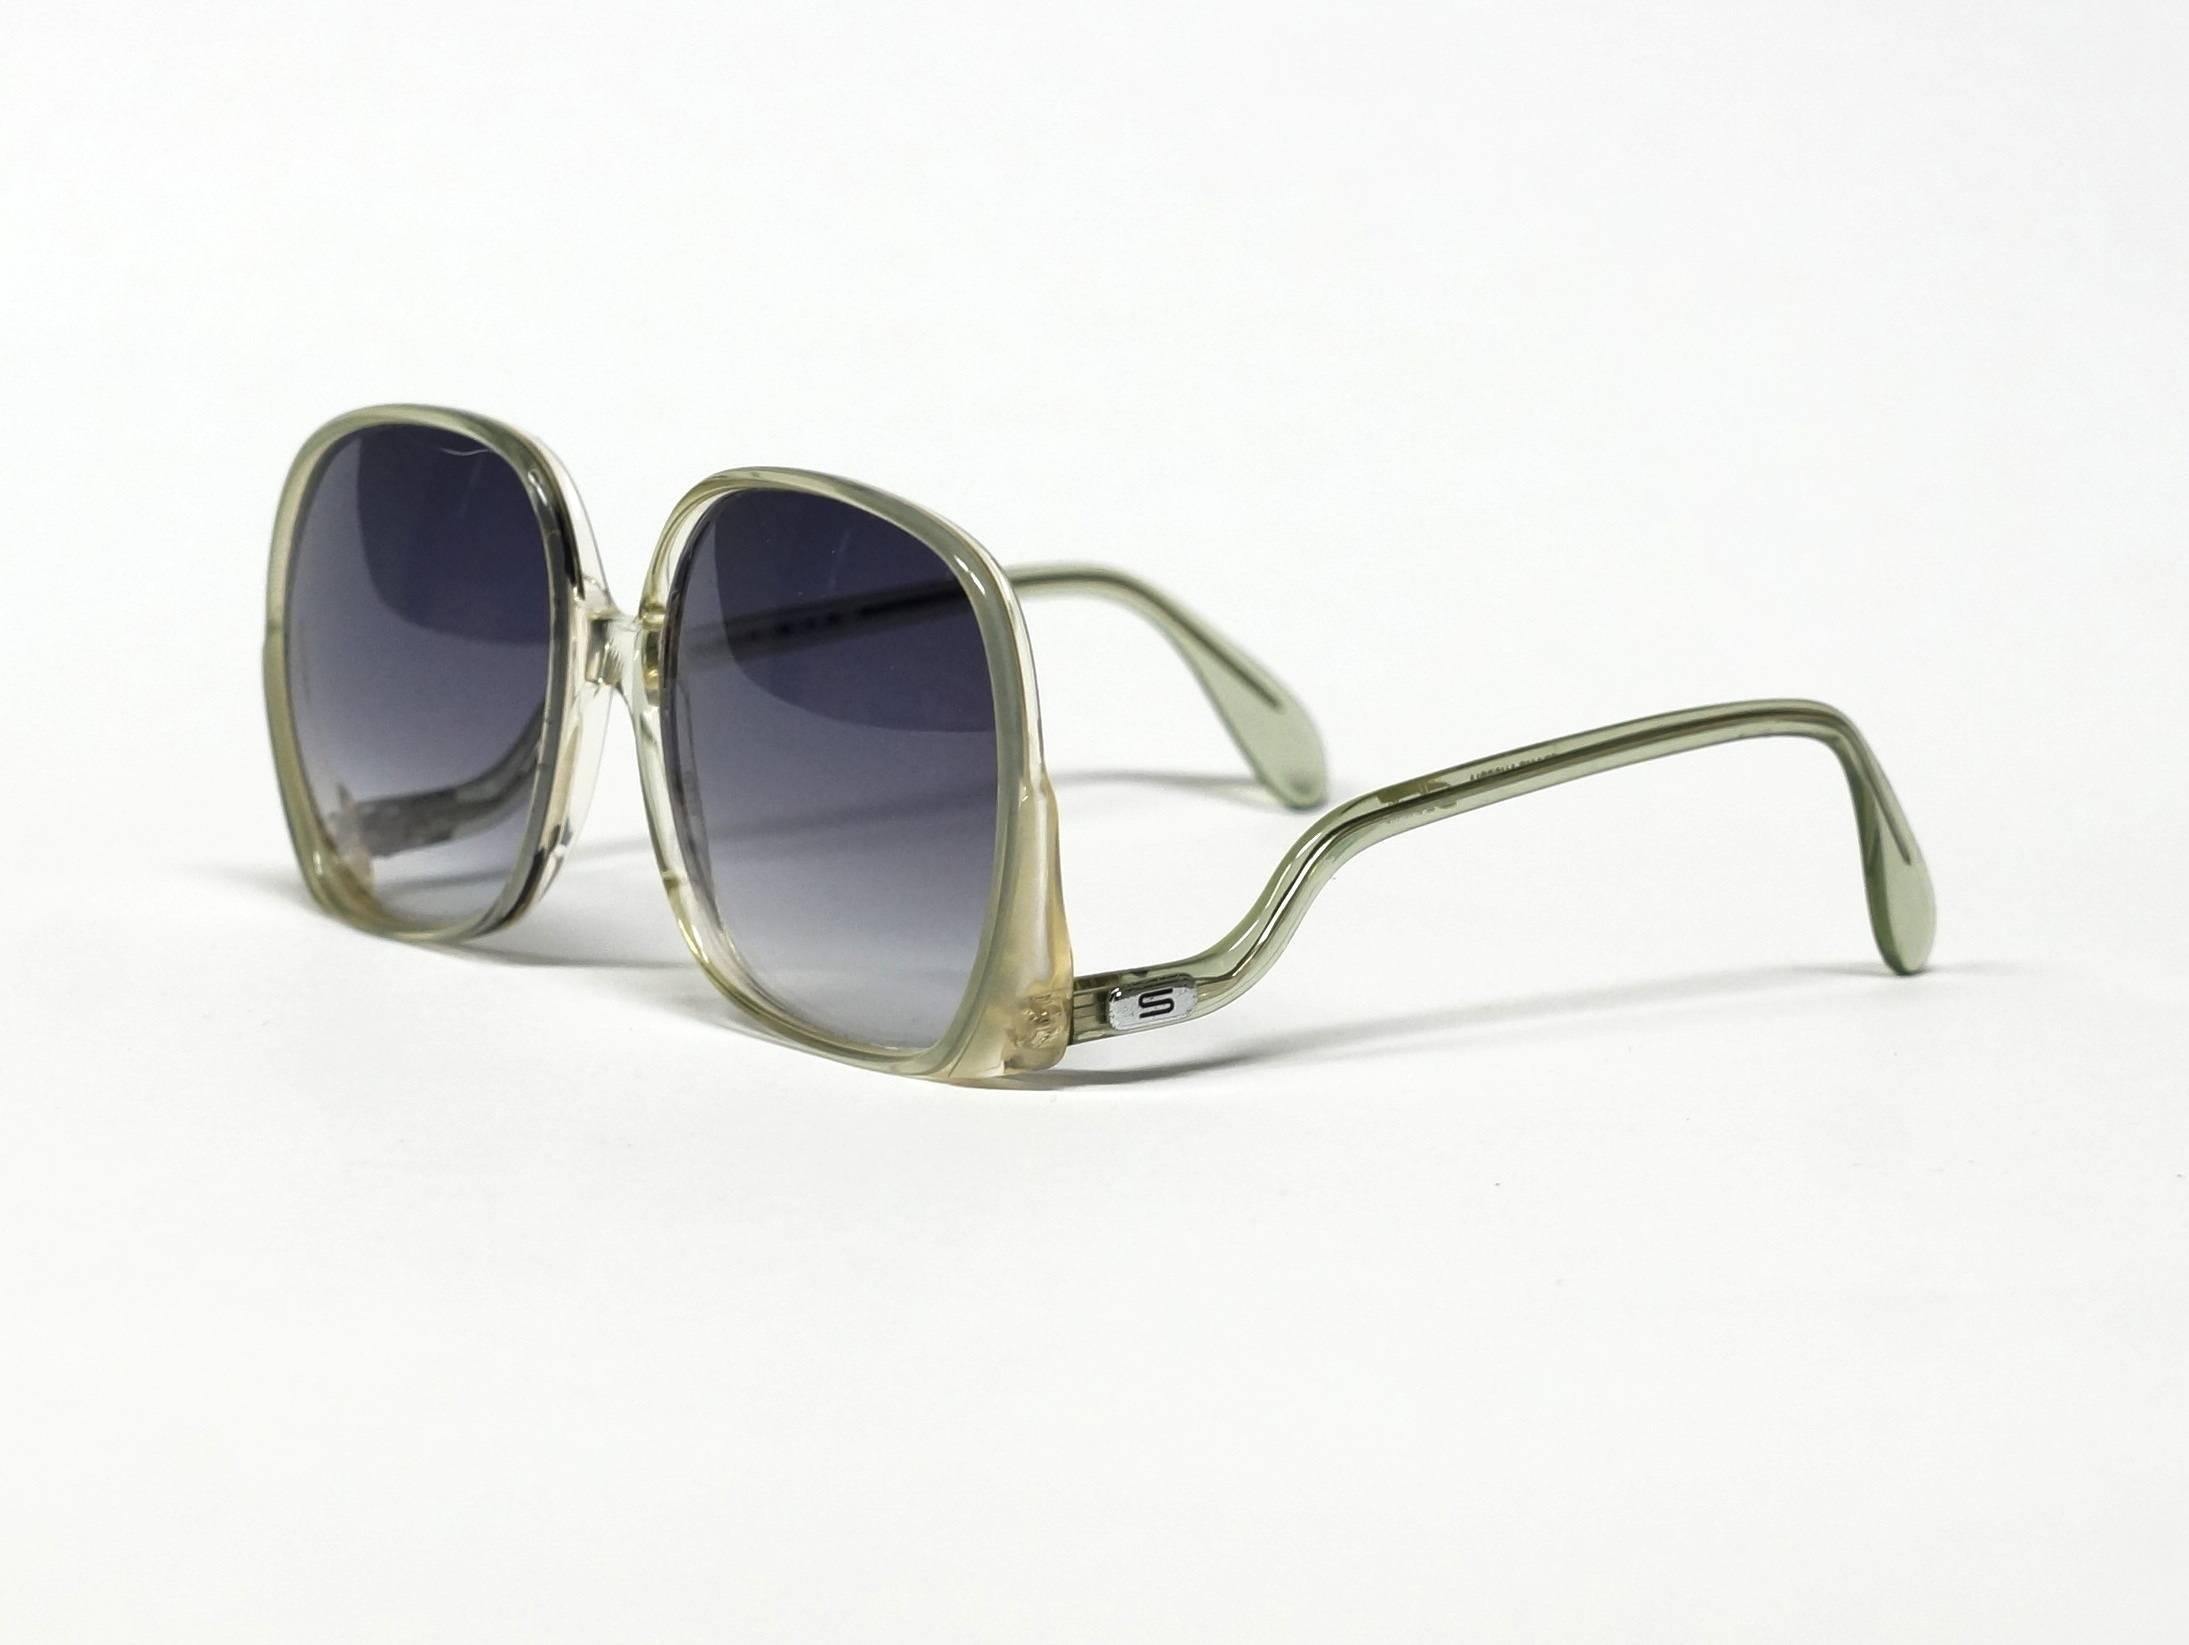 Rectangular oversized vintage sunglasses by the Austrian brand Silhouette in translucent soft light green with drop temples. 

approximate dimensions:  
temple length: 135mm - 5 5/16